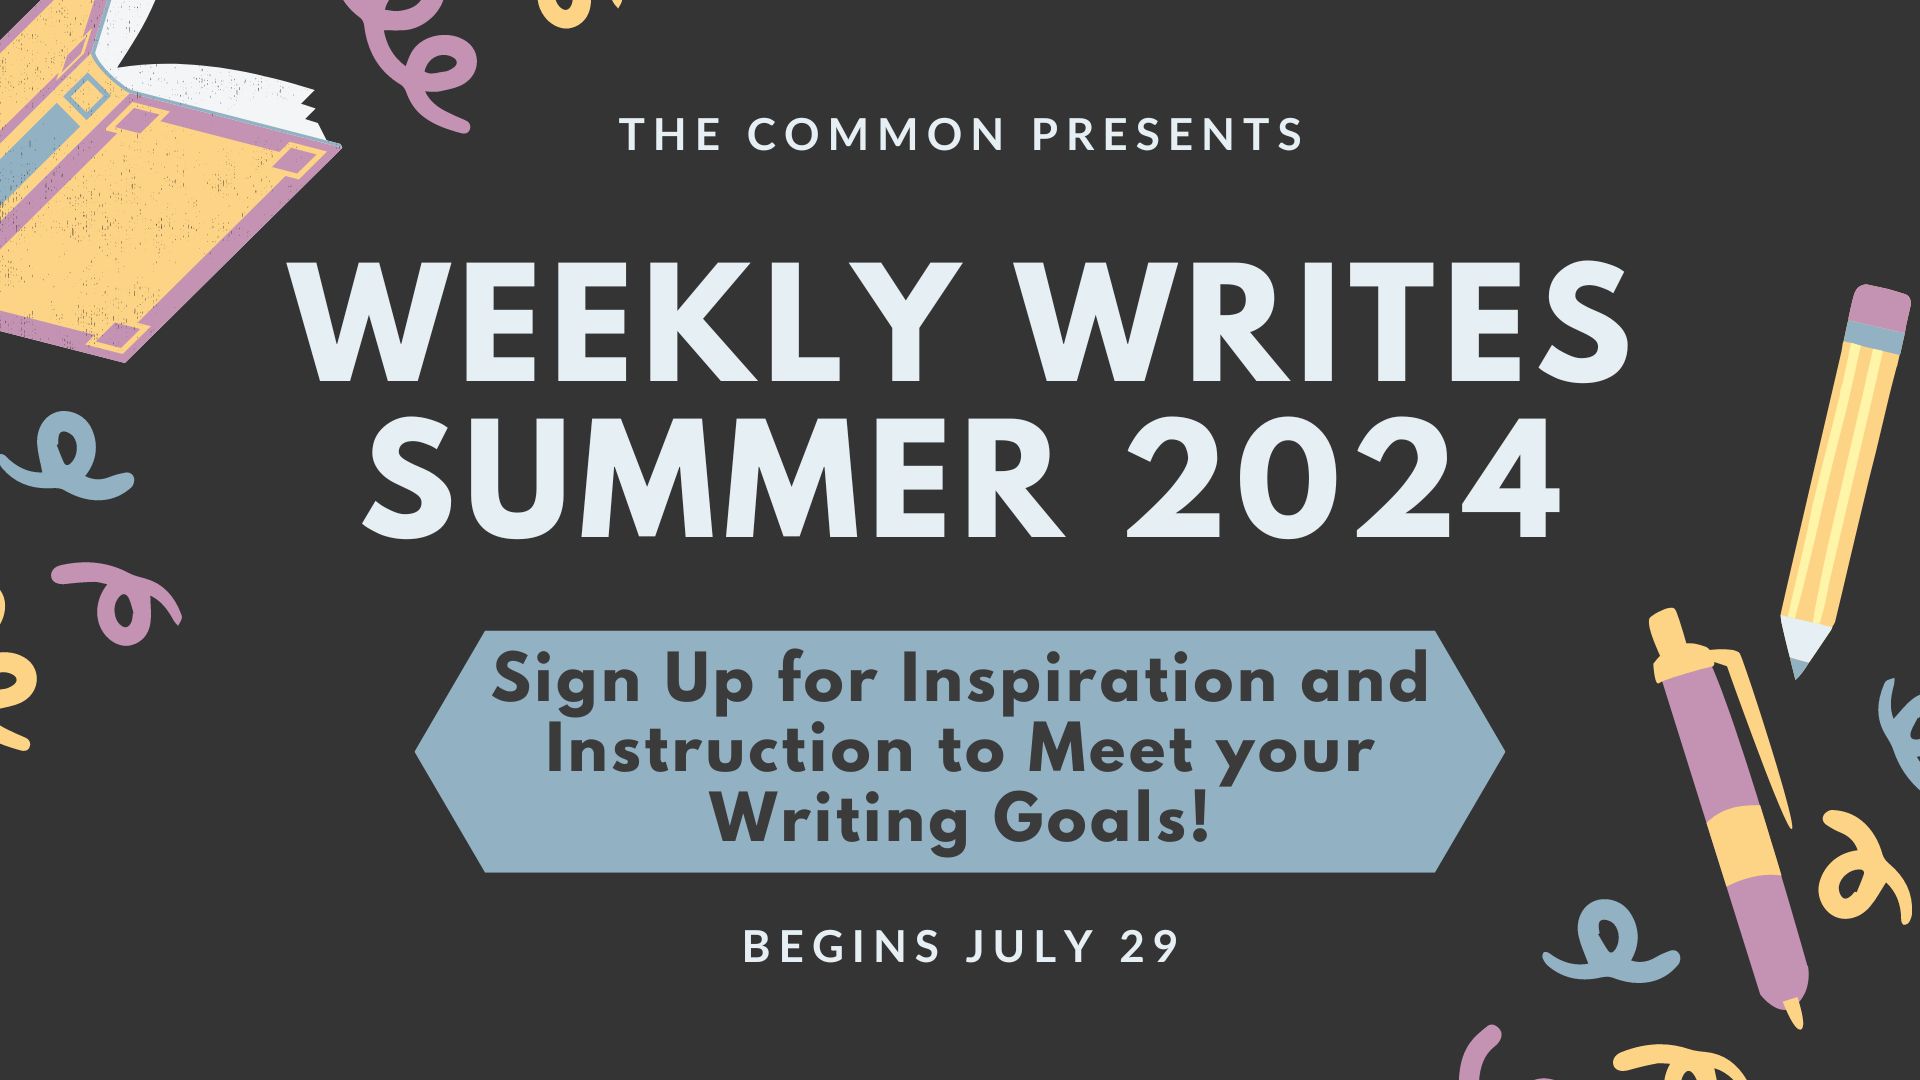 A graphic advertisement for Weekly Writes, saying "Sign up for Inspiration and Instruction to Meet Your Writing Goals!"